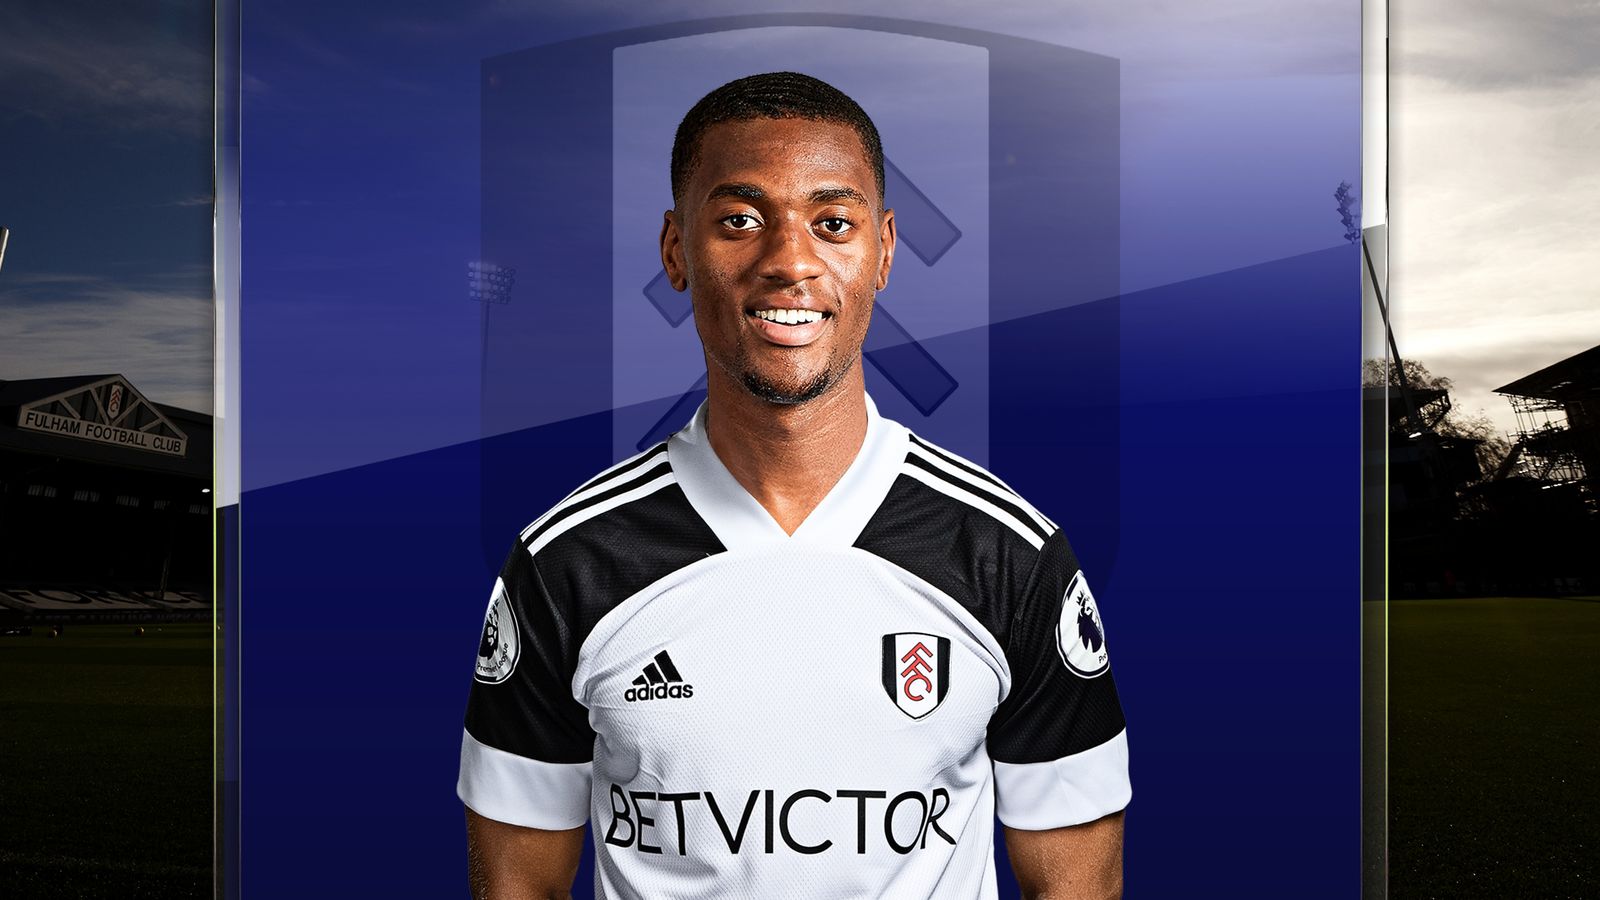  Tosin Adarabioyo is pictured in a Fulham kit with a big smile on his face.